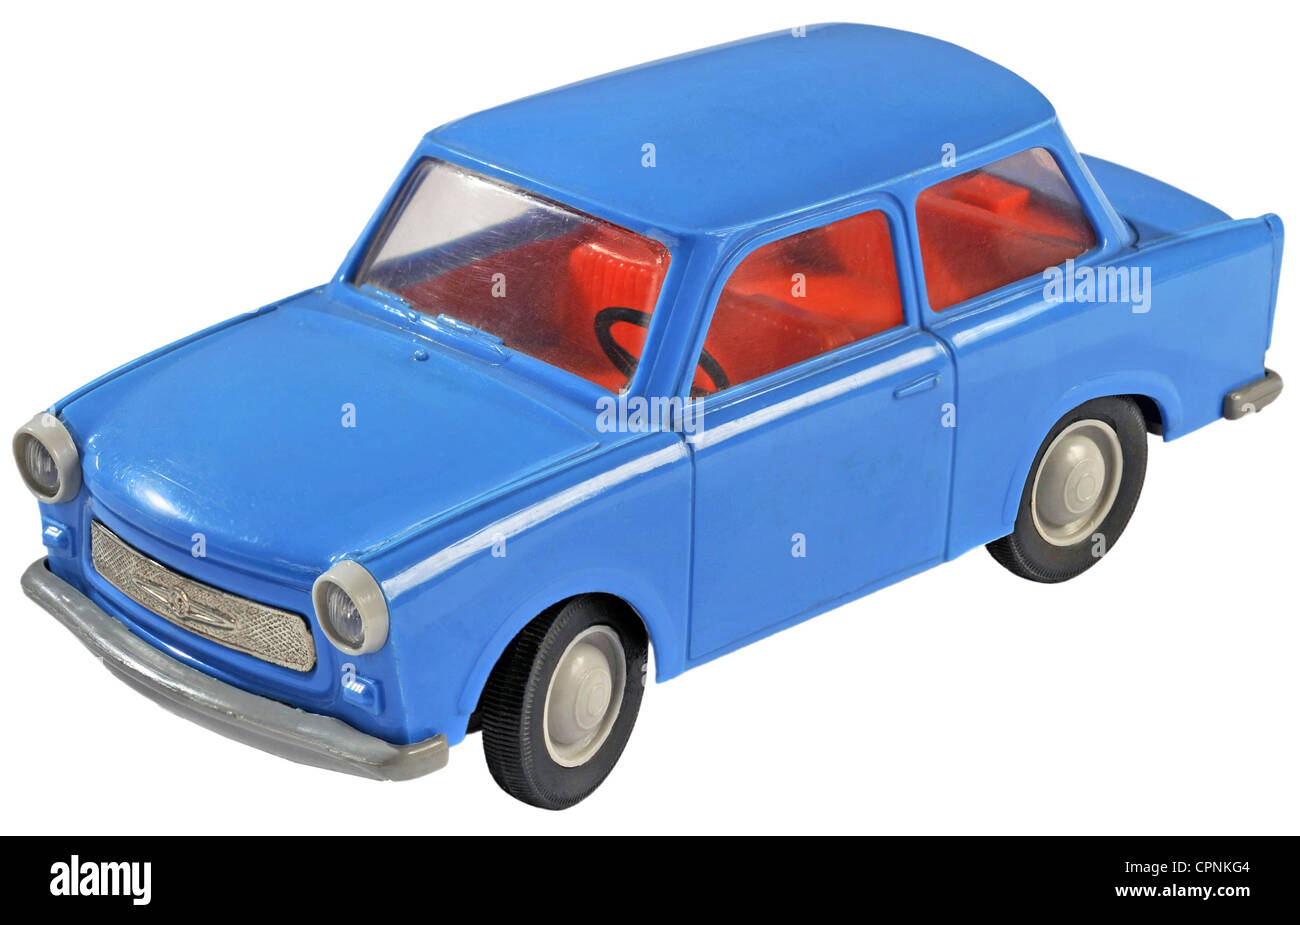 toys,dinky car,Trabant 601,cylinder capacity: 594.5 cubic centimetre,23 horsepower,maximum speed: 100 kph,VEB Sachsenring Automobilwerke Zwickau,East-Germany,circa 1985,toy car,toy cars,plastic,East-Germany,East Germany,GDR,DDR,blue,two-stroke,small car,East-Germany car,playthings,toy,plaything,toys,still,clipping,cut out,cut-out,cut-outs,80s,1980s,Trabbi,Trabant,motor car,auto,passenger car,motorcar,motorcars,autos,passenger cars,car,cars,autocar,automobile,autocars,automobiles,power-driven vehicle,motor vehicle,,Additional-Rights-Clearences-Not Available Stock Photo